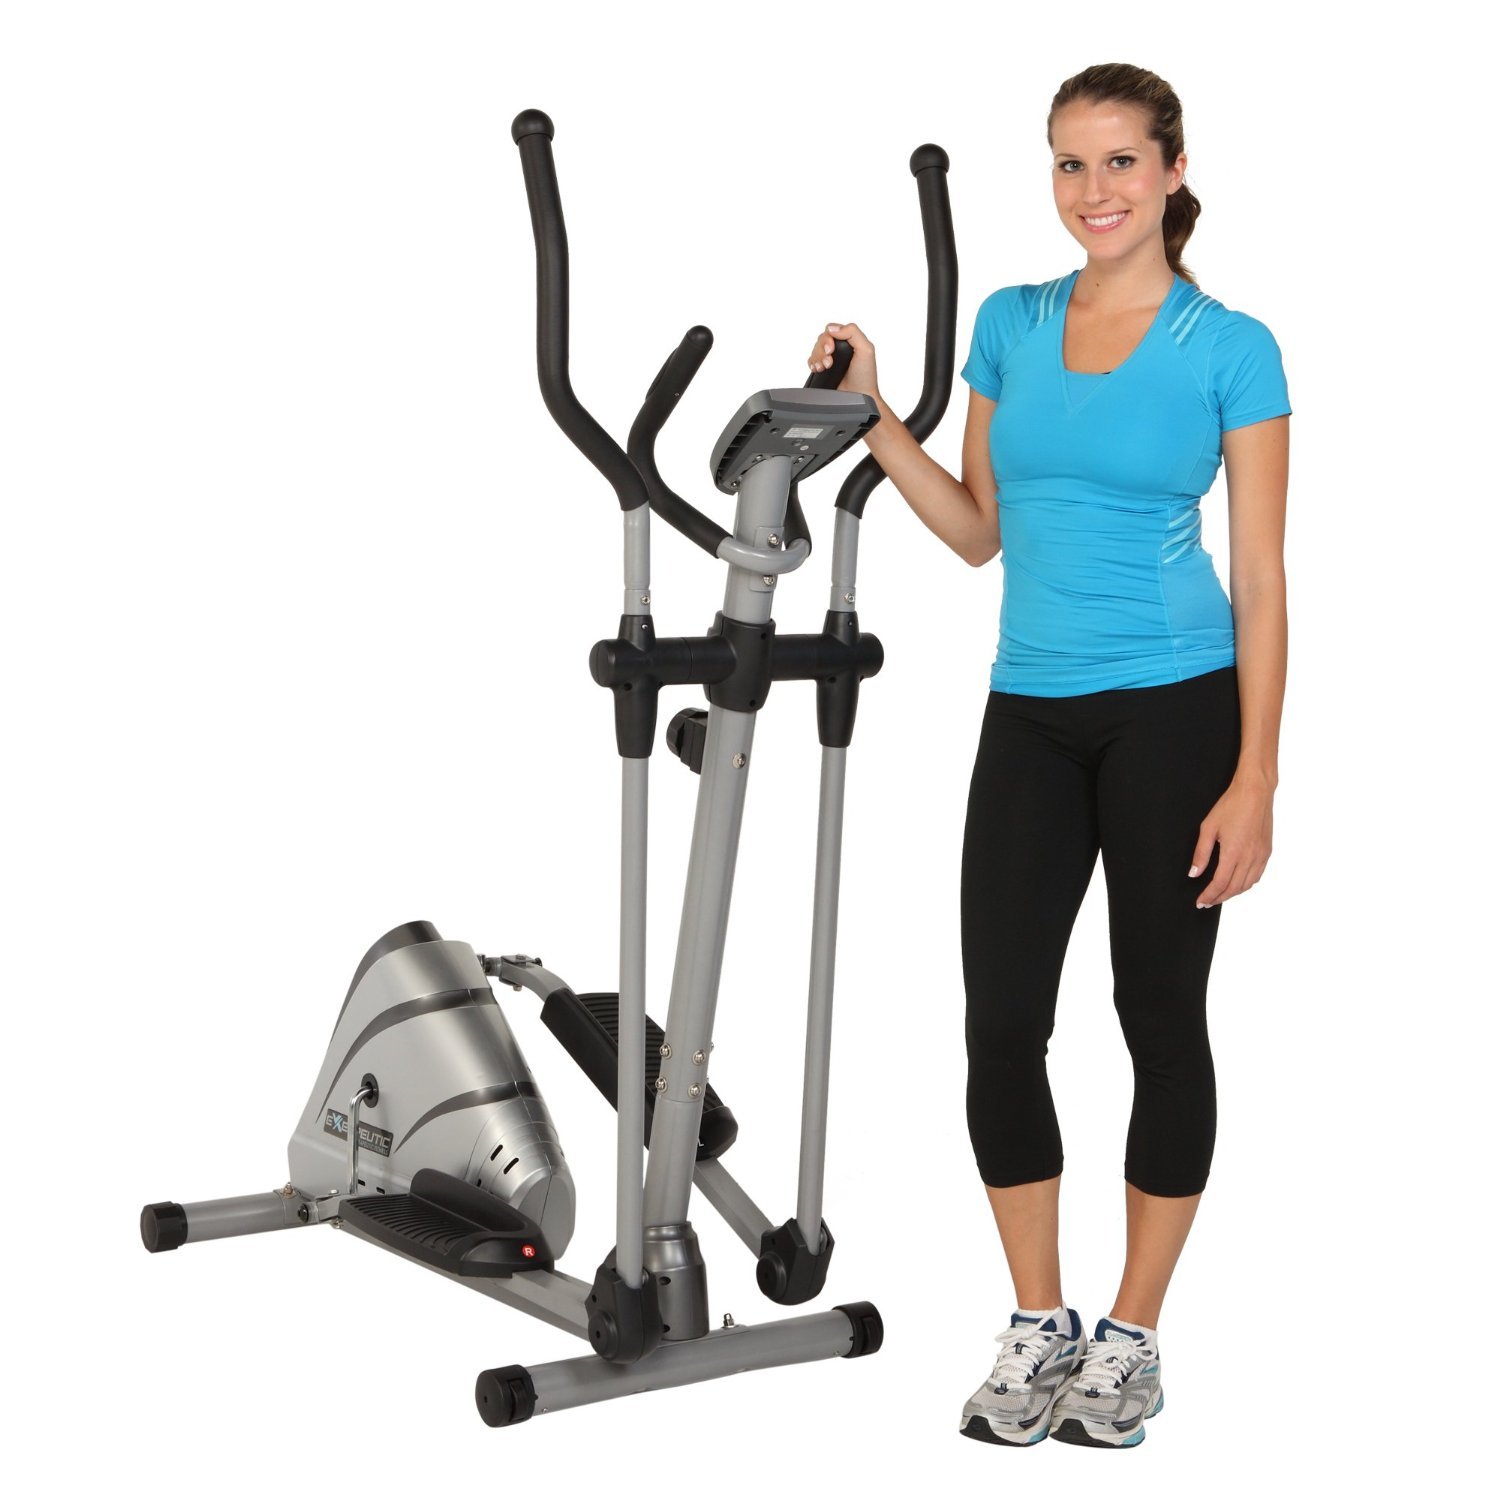 Exerpeutic 1000Xl Heavy Duty Magnetic Elliptical with Pulse is one of the best elliptical machines under $200